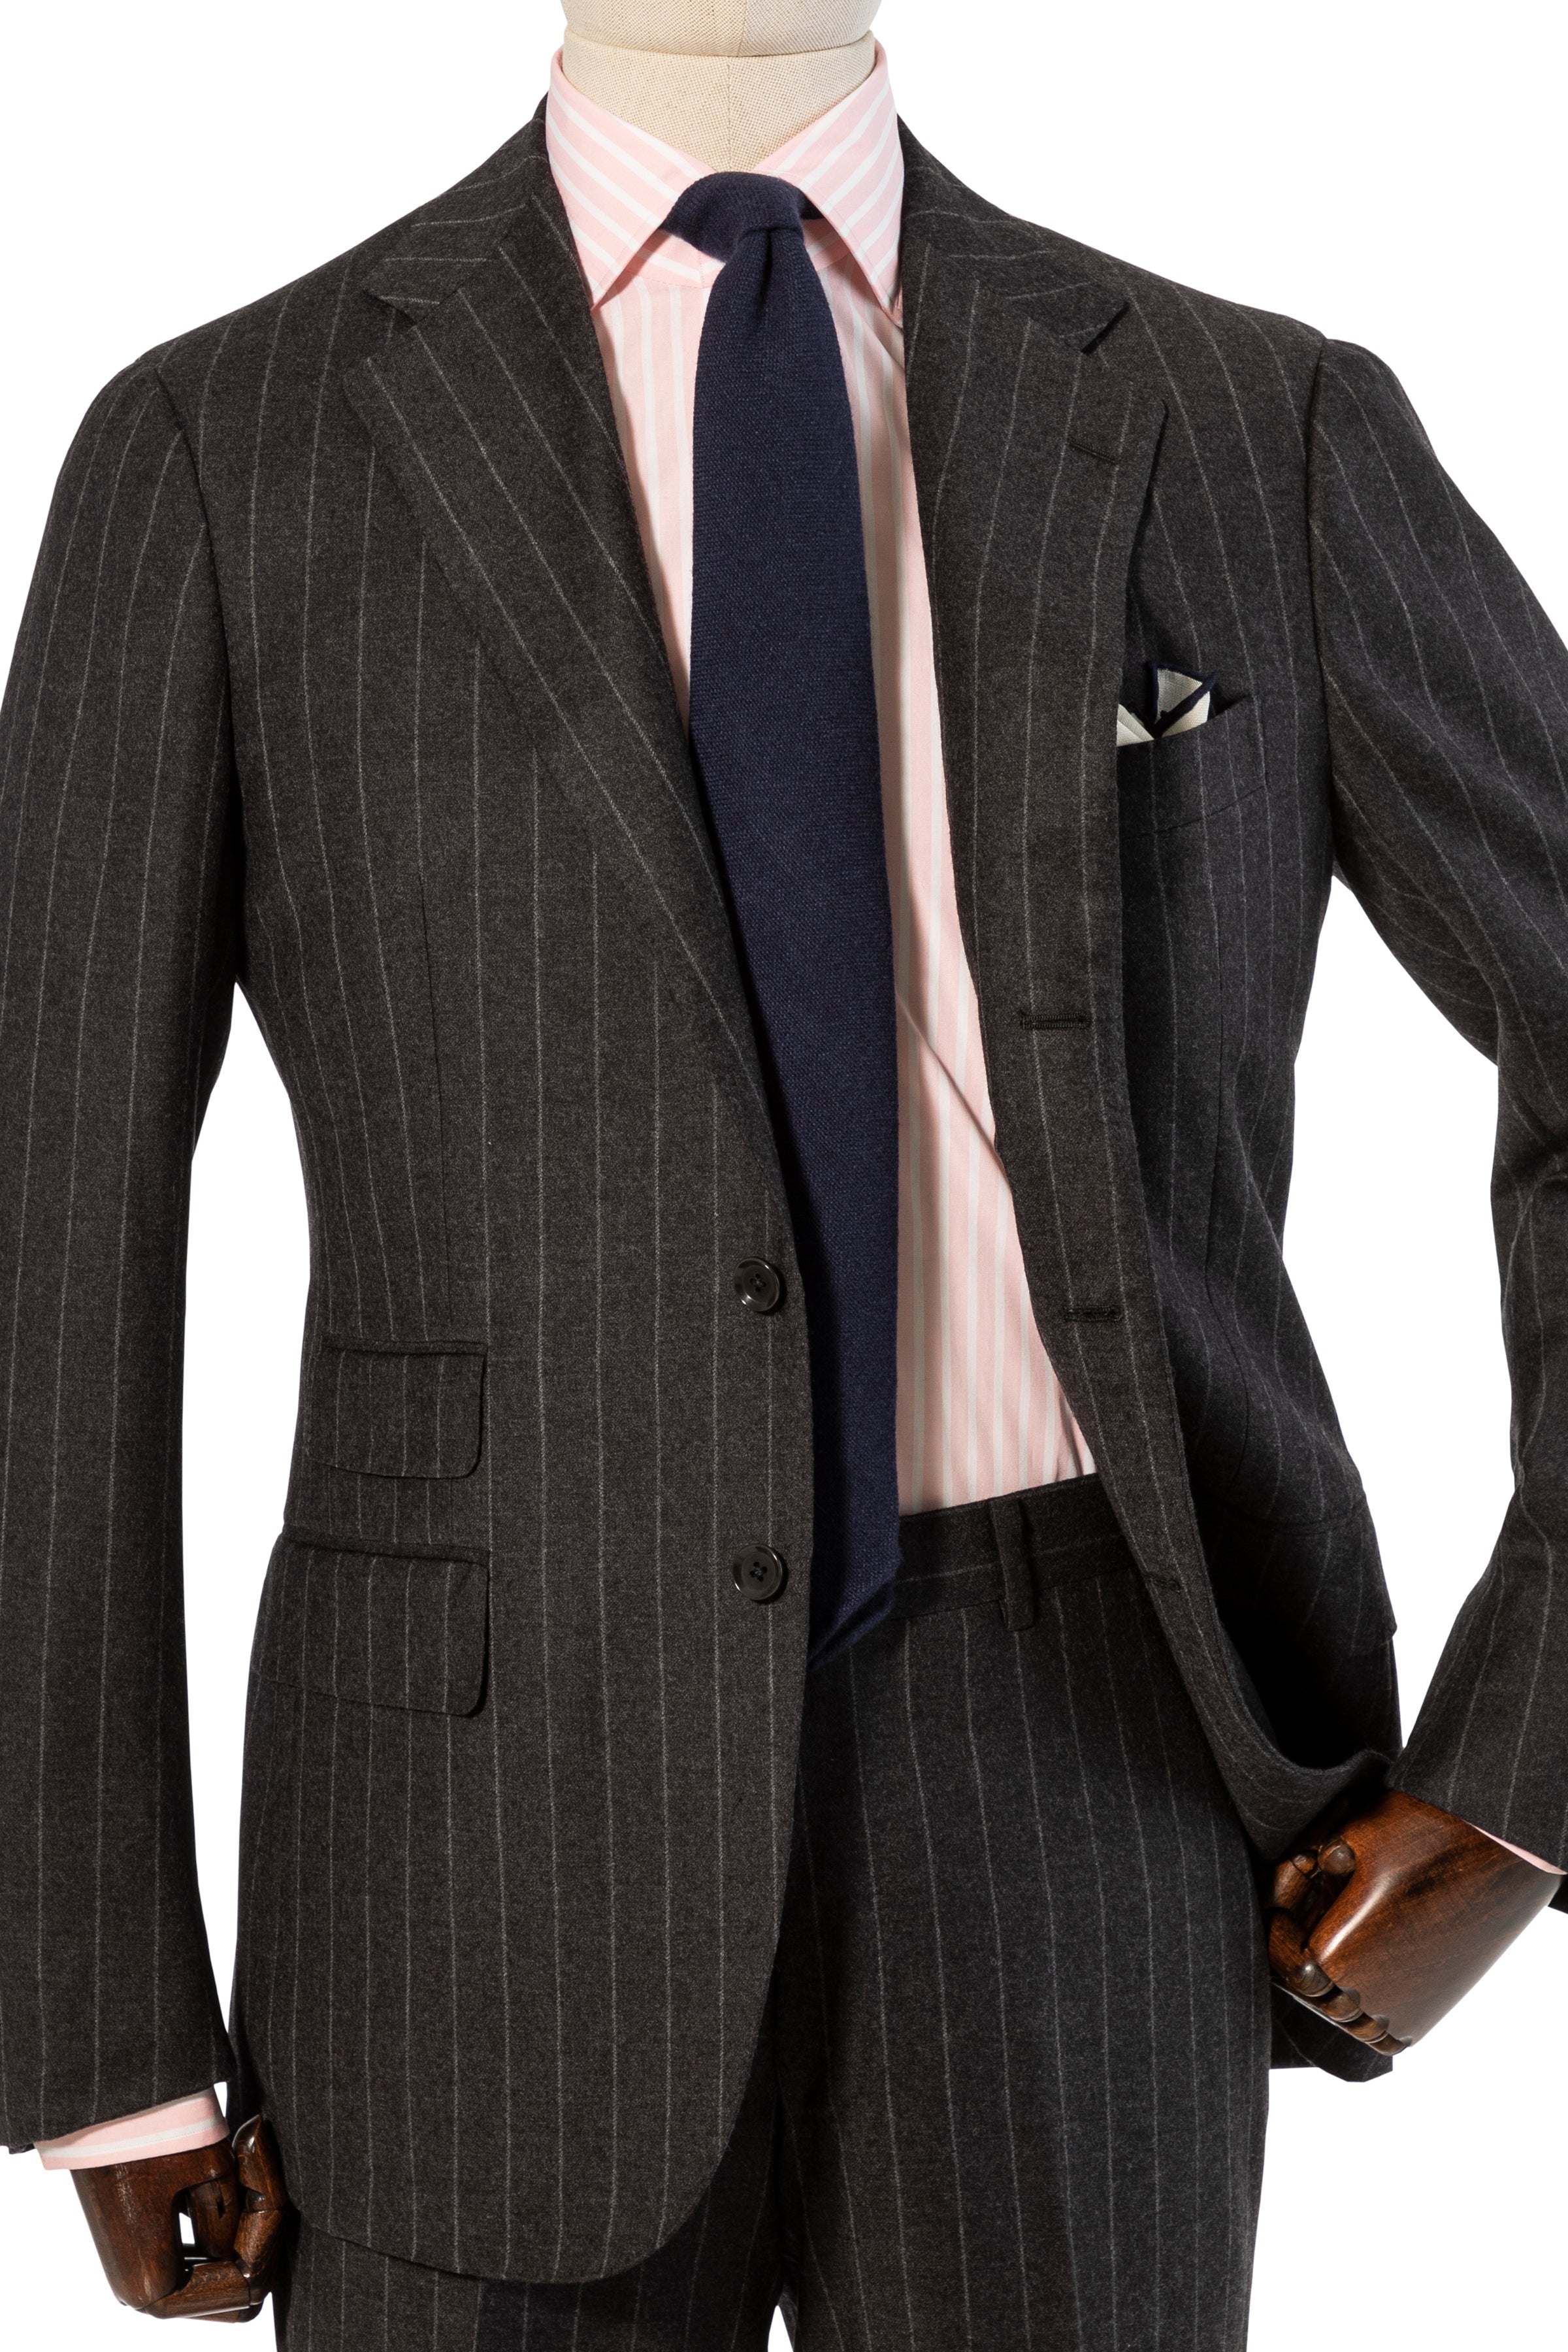 The Armoury by Ring Jacket Model 3A Grey Dormeuil Flannel Chalkstripe Suit